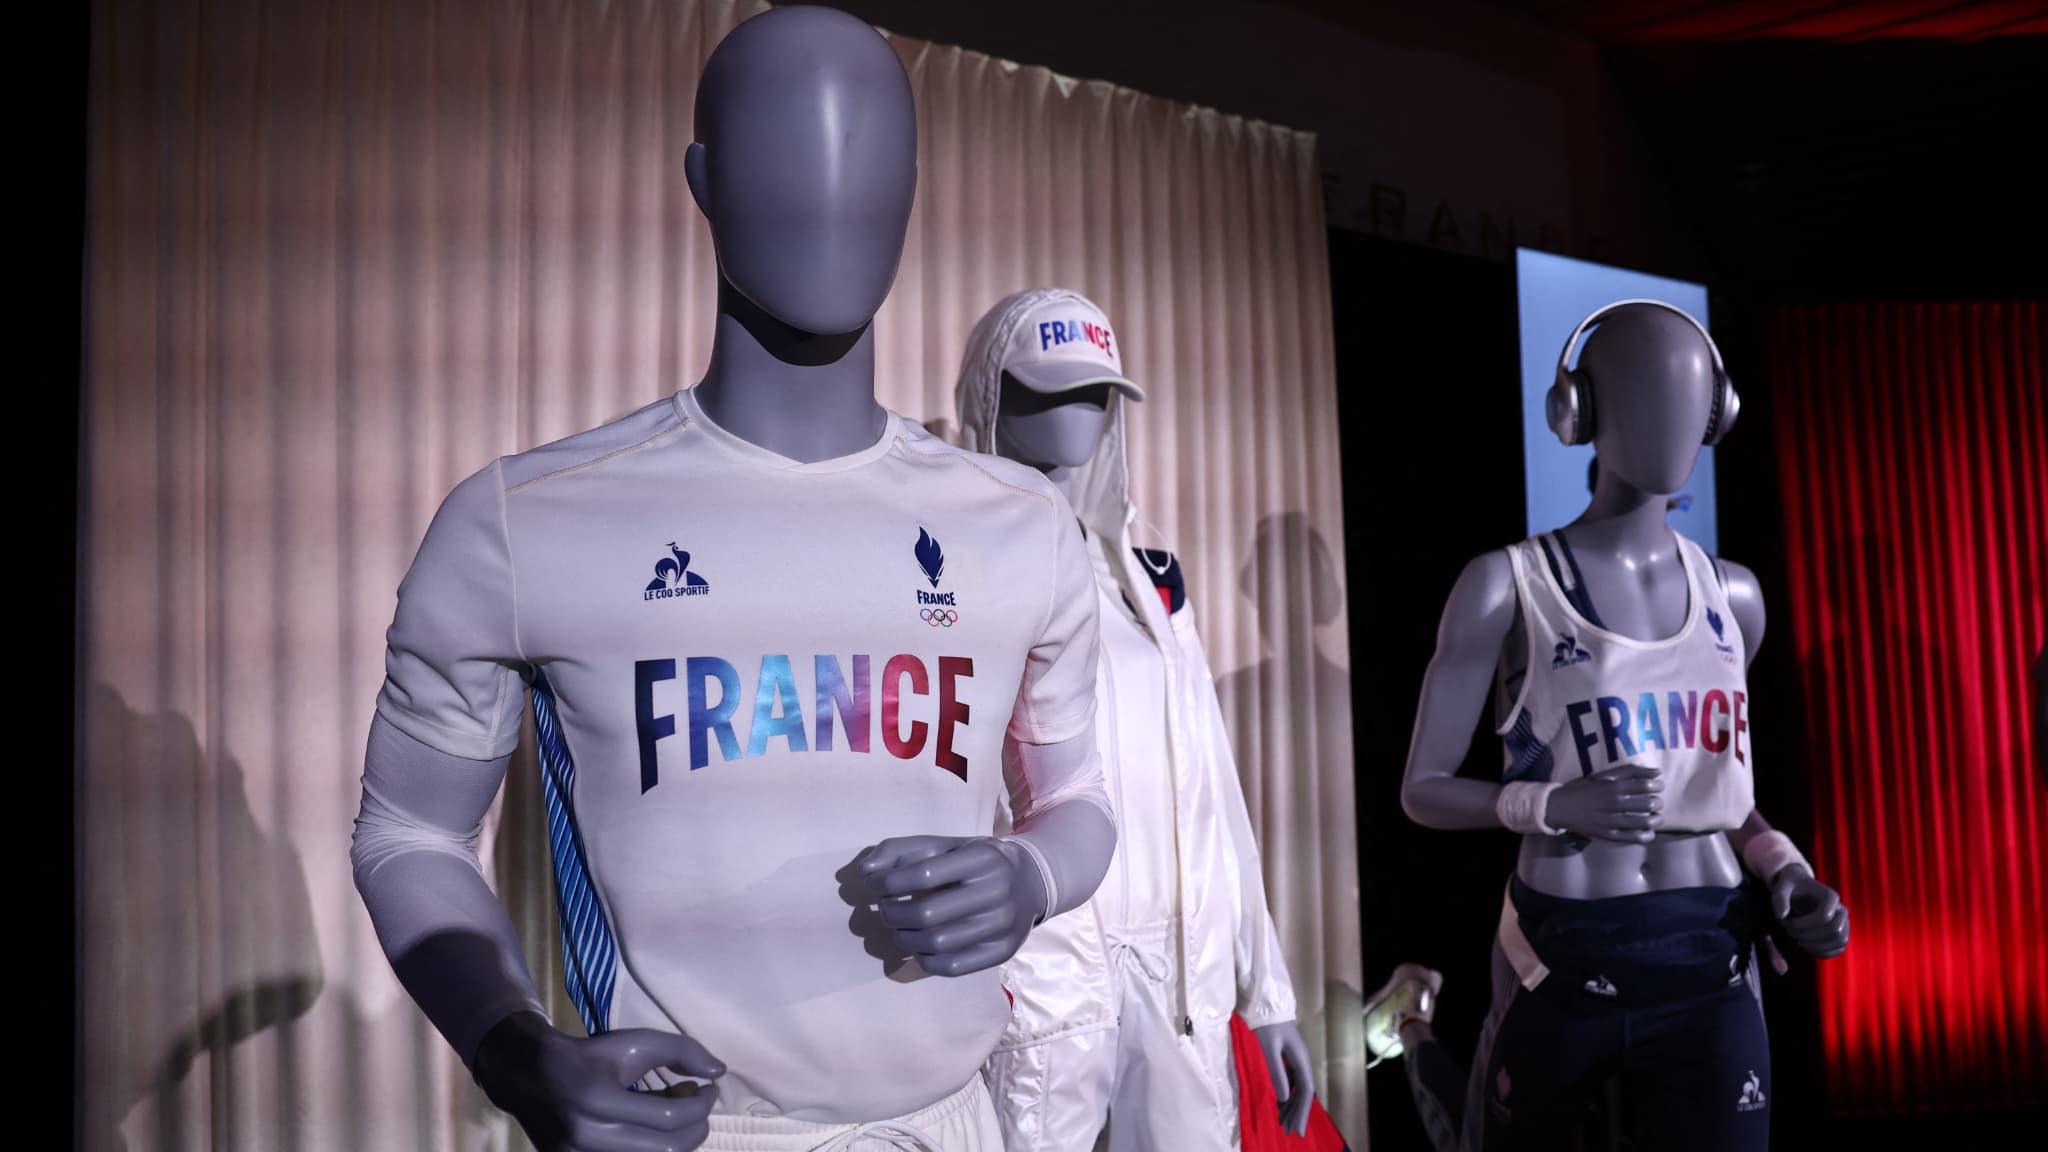 Will Le Coq Sportif be able to deliver all the official kits in time?